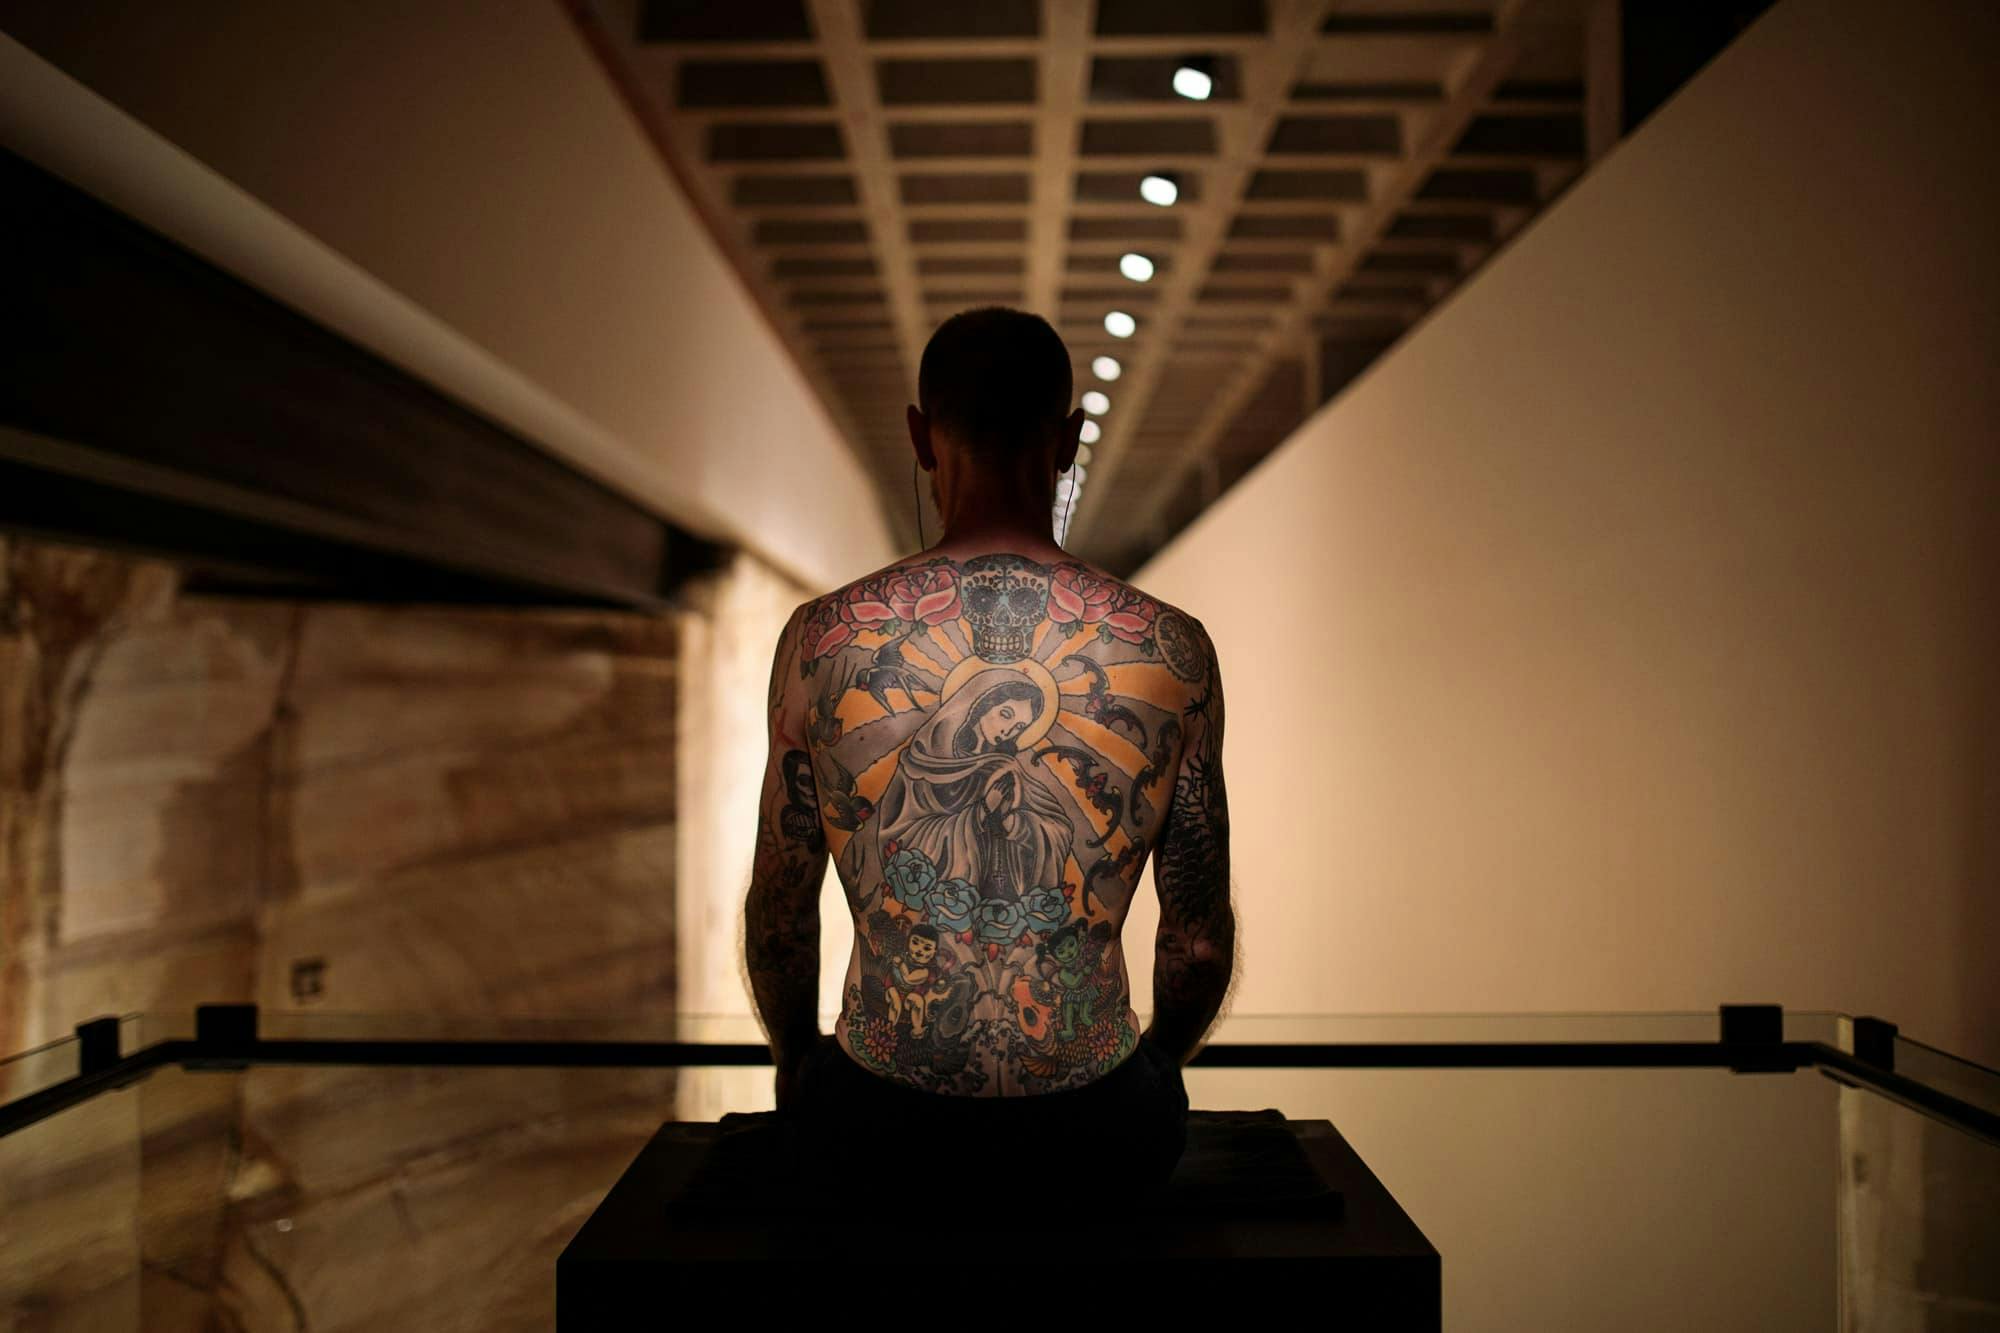 Tim sits in a plinth displaying his back of tattoos